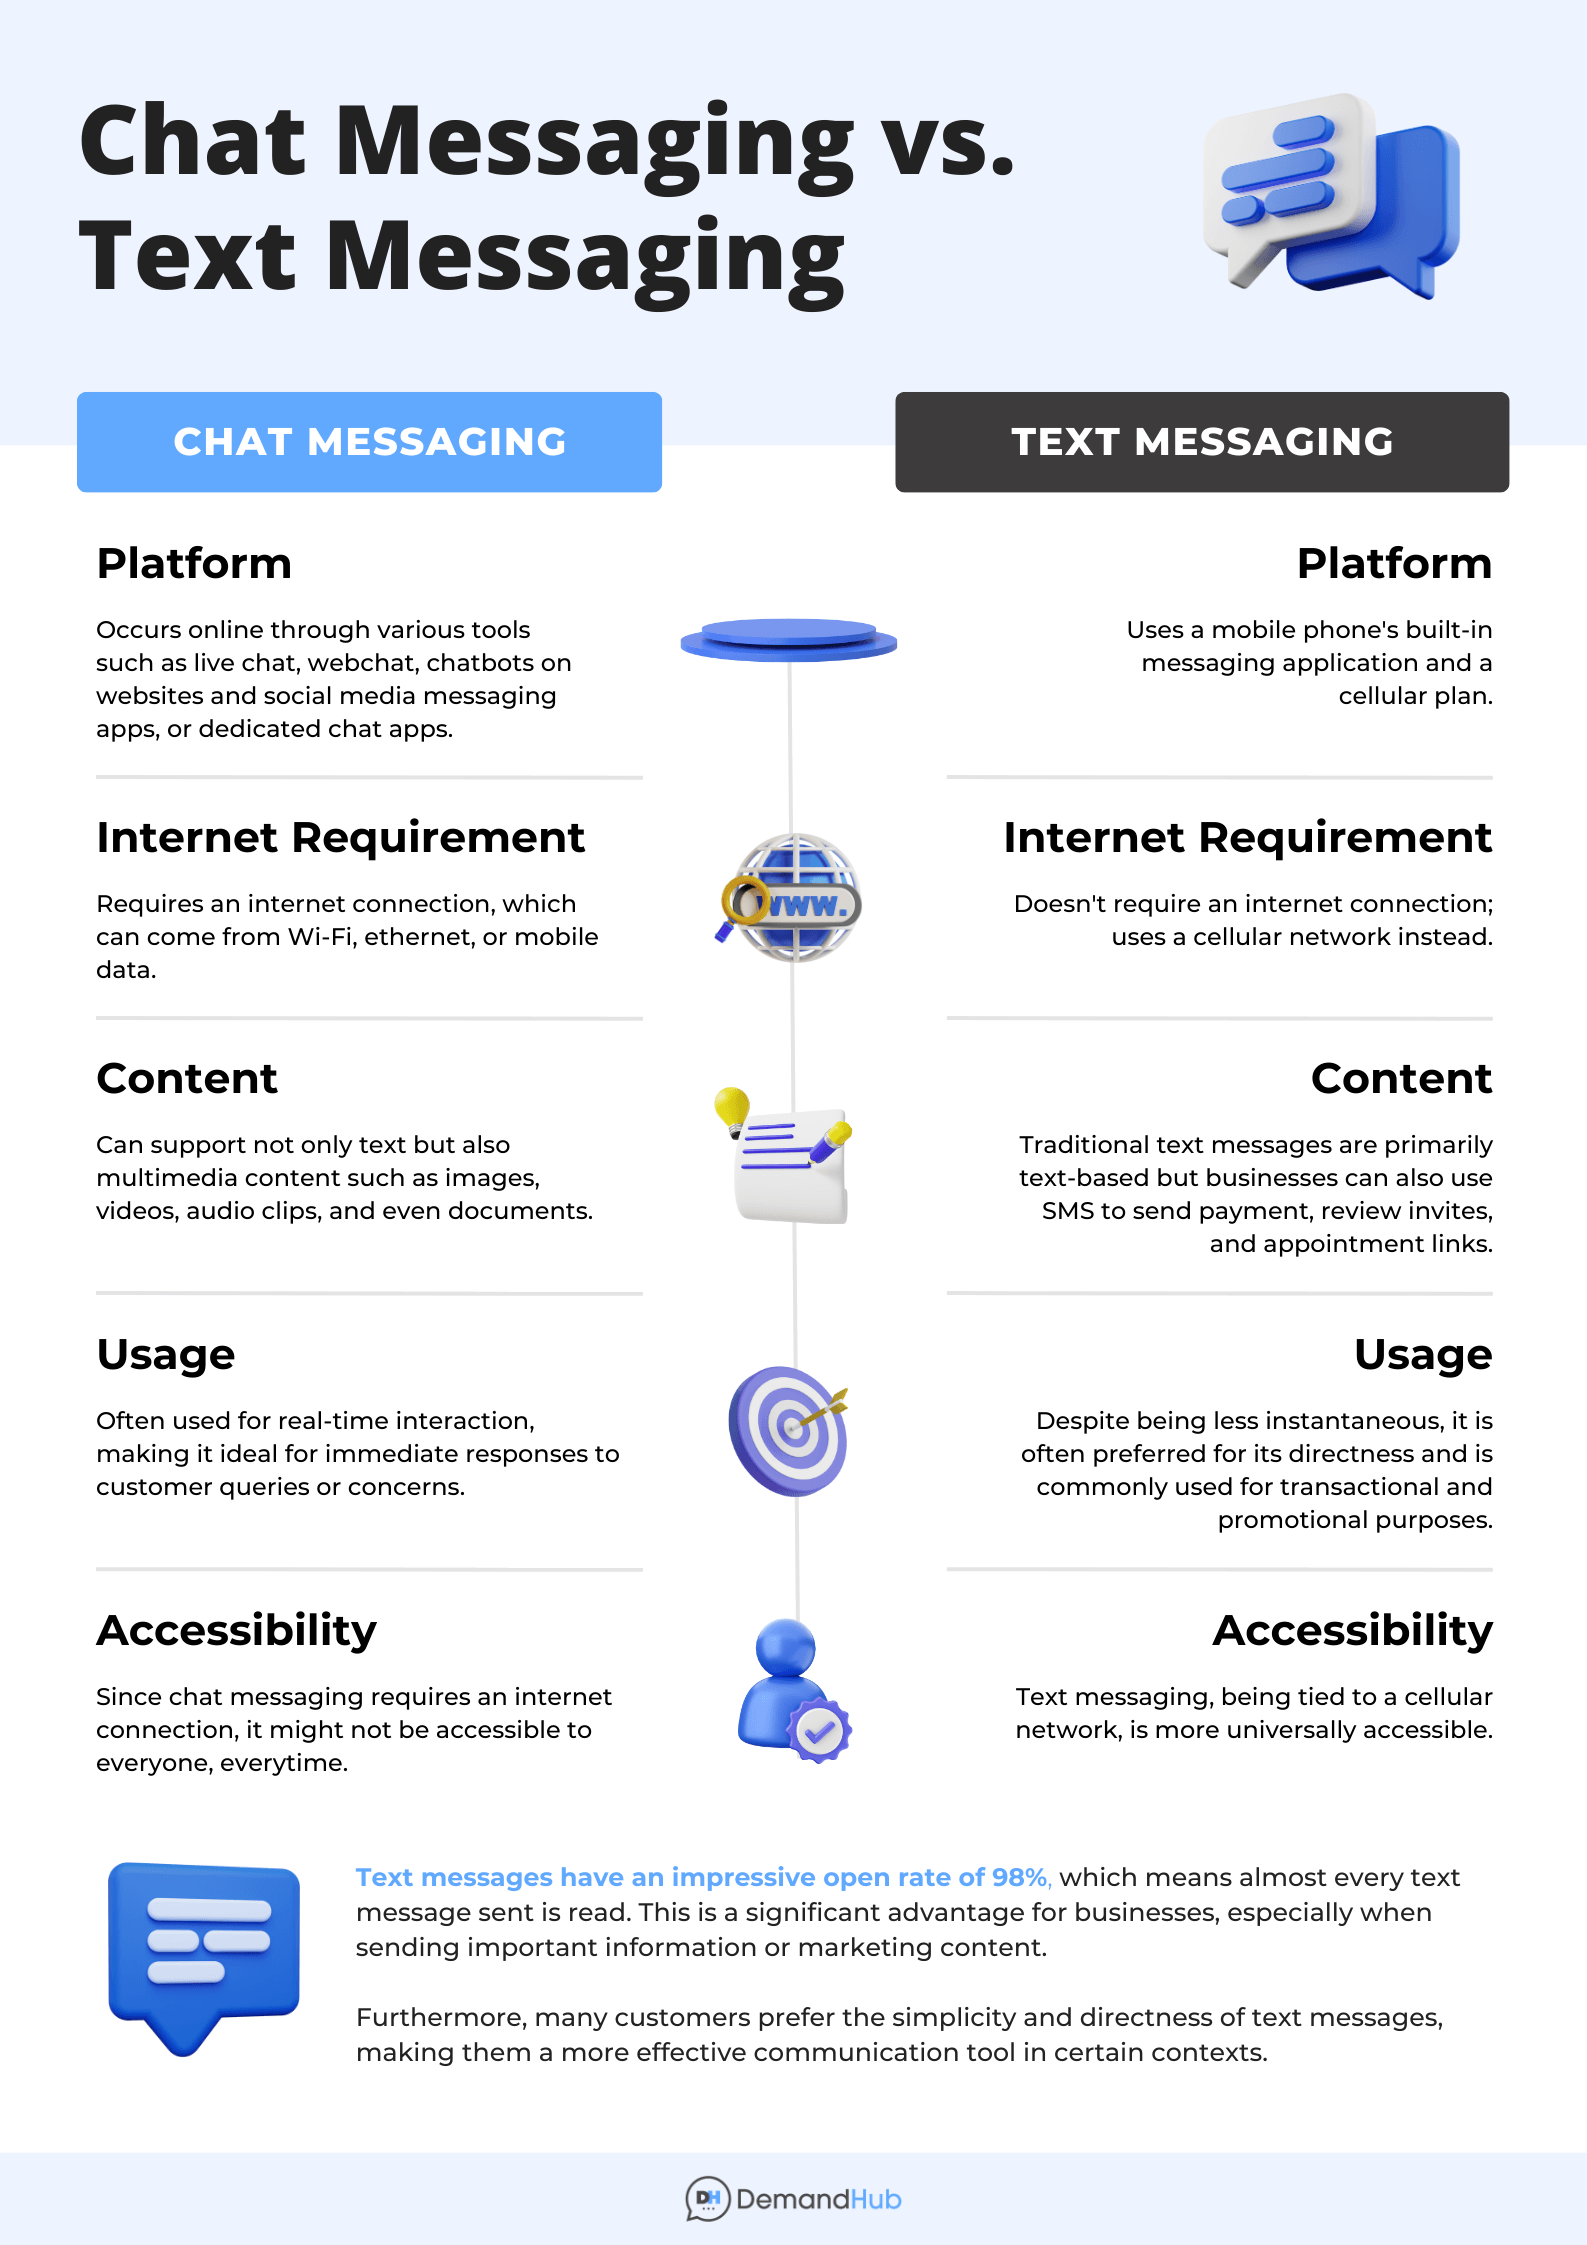 Difference Between Chat Messaging and Text Messaging